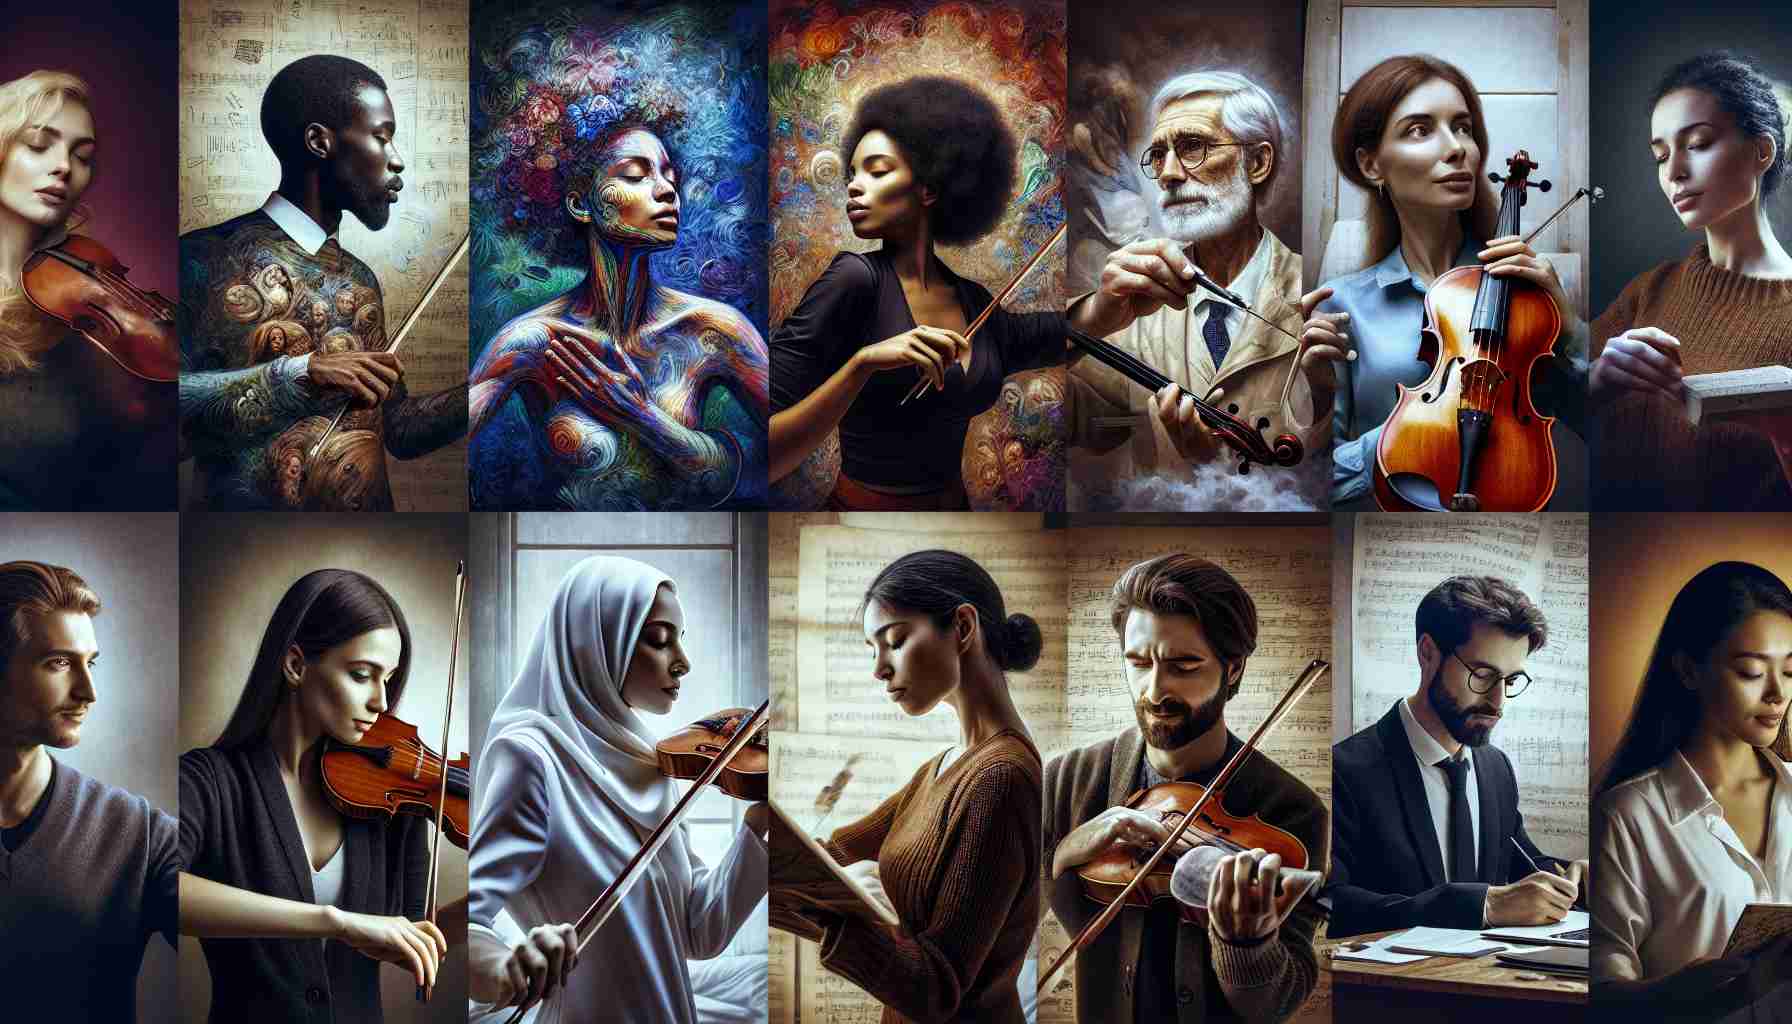 Generate a high-definition, realistic image depicting the concepts of individual strengths and self-expression. This could feature people of mixed gender and diversely ethnocultural backgrounds demonstrating their unique skills and talents in a variety of ways. Some possibilities could be a Black woman painting in a studio, a Caucasian man playing violin, a Middle-Eastern woman writing poetry, or a South Asian man engrossed in a scientific experiment. These individuals are embracing and displaying their distinctive abilities, their faces lit with passion and dedication.